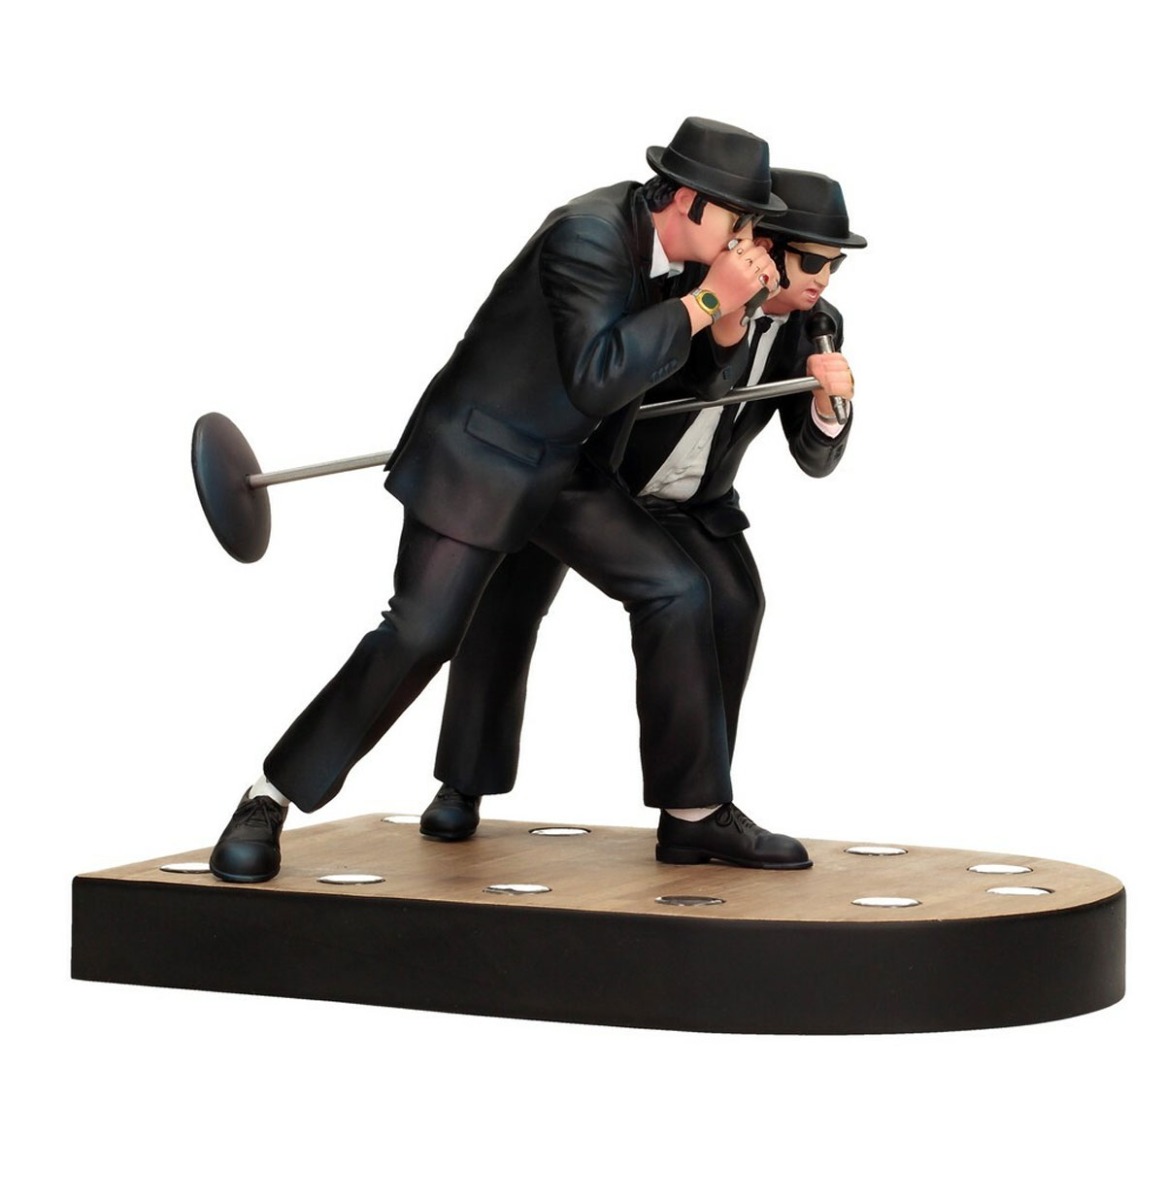 Fiftiesstore The Blues Brothers: Elwood and Jake Zingen the Blues 1:10 Scale PVC Beeld